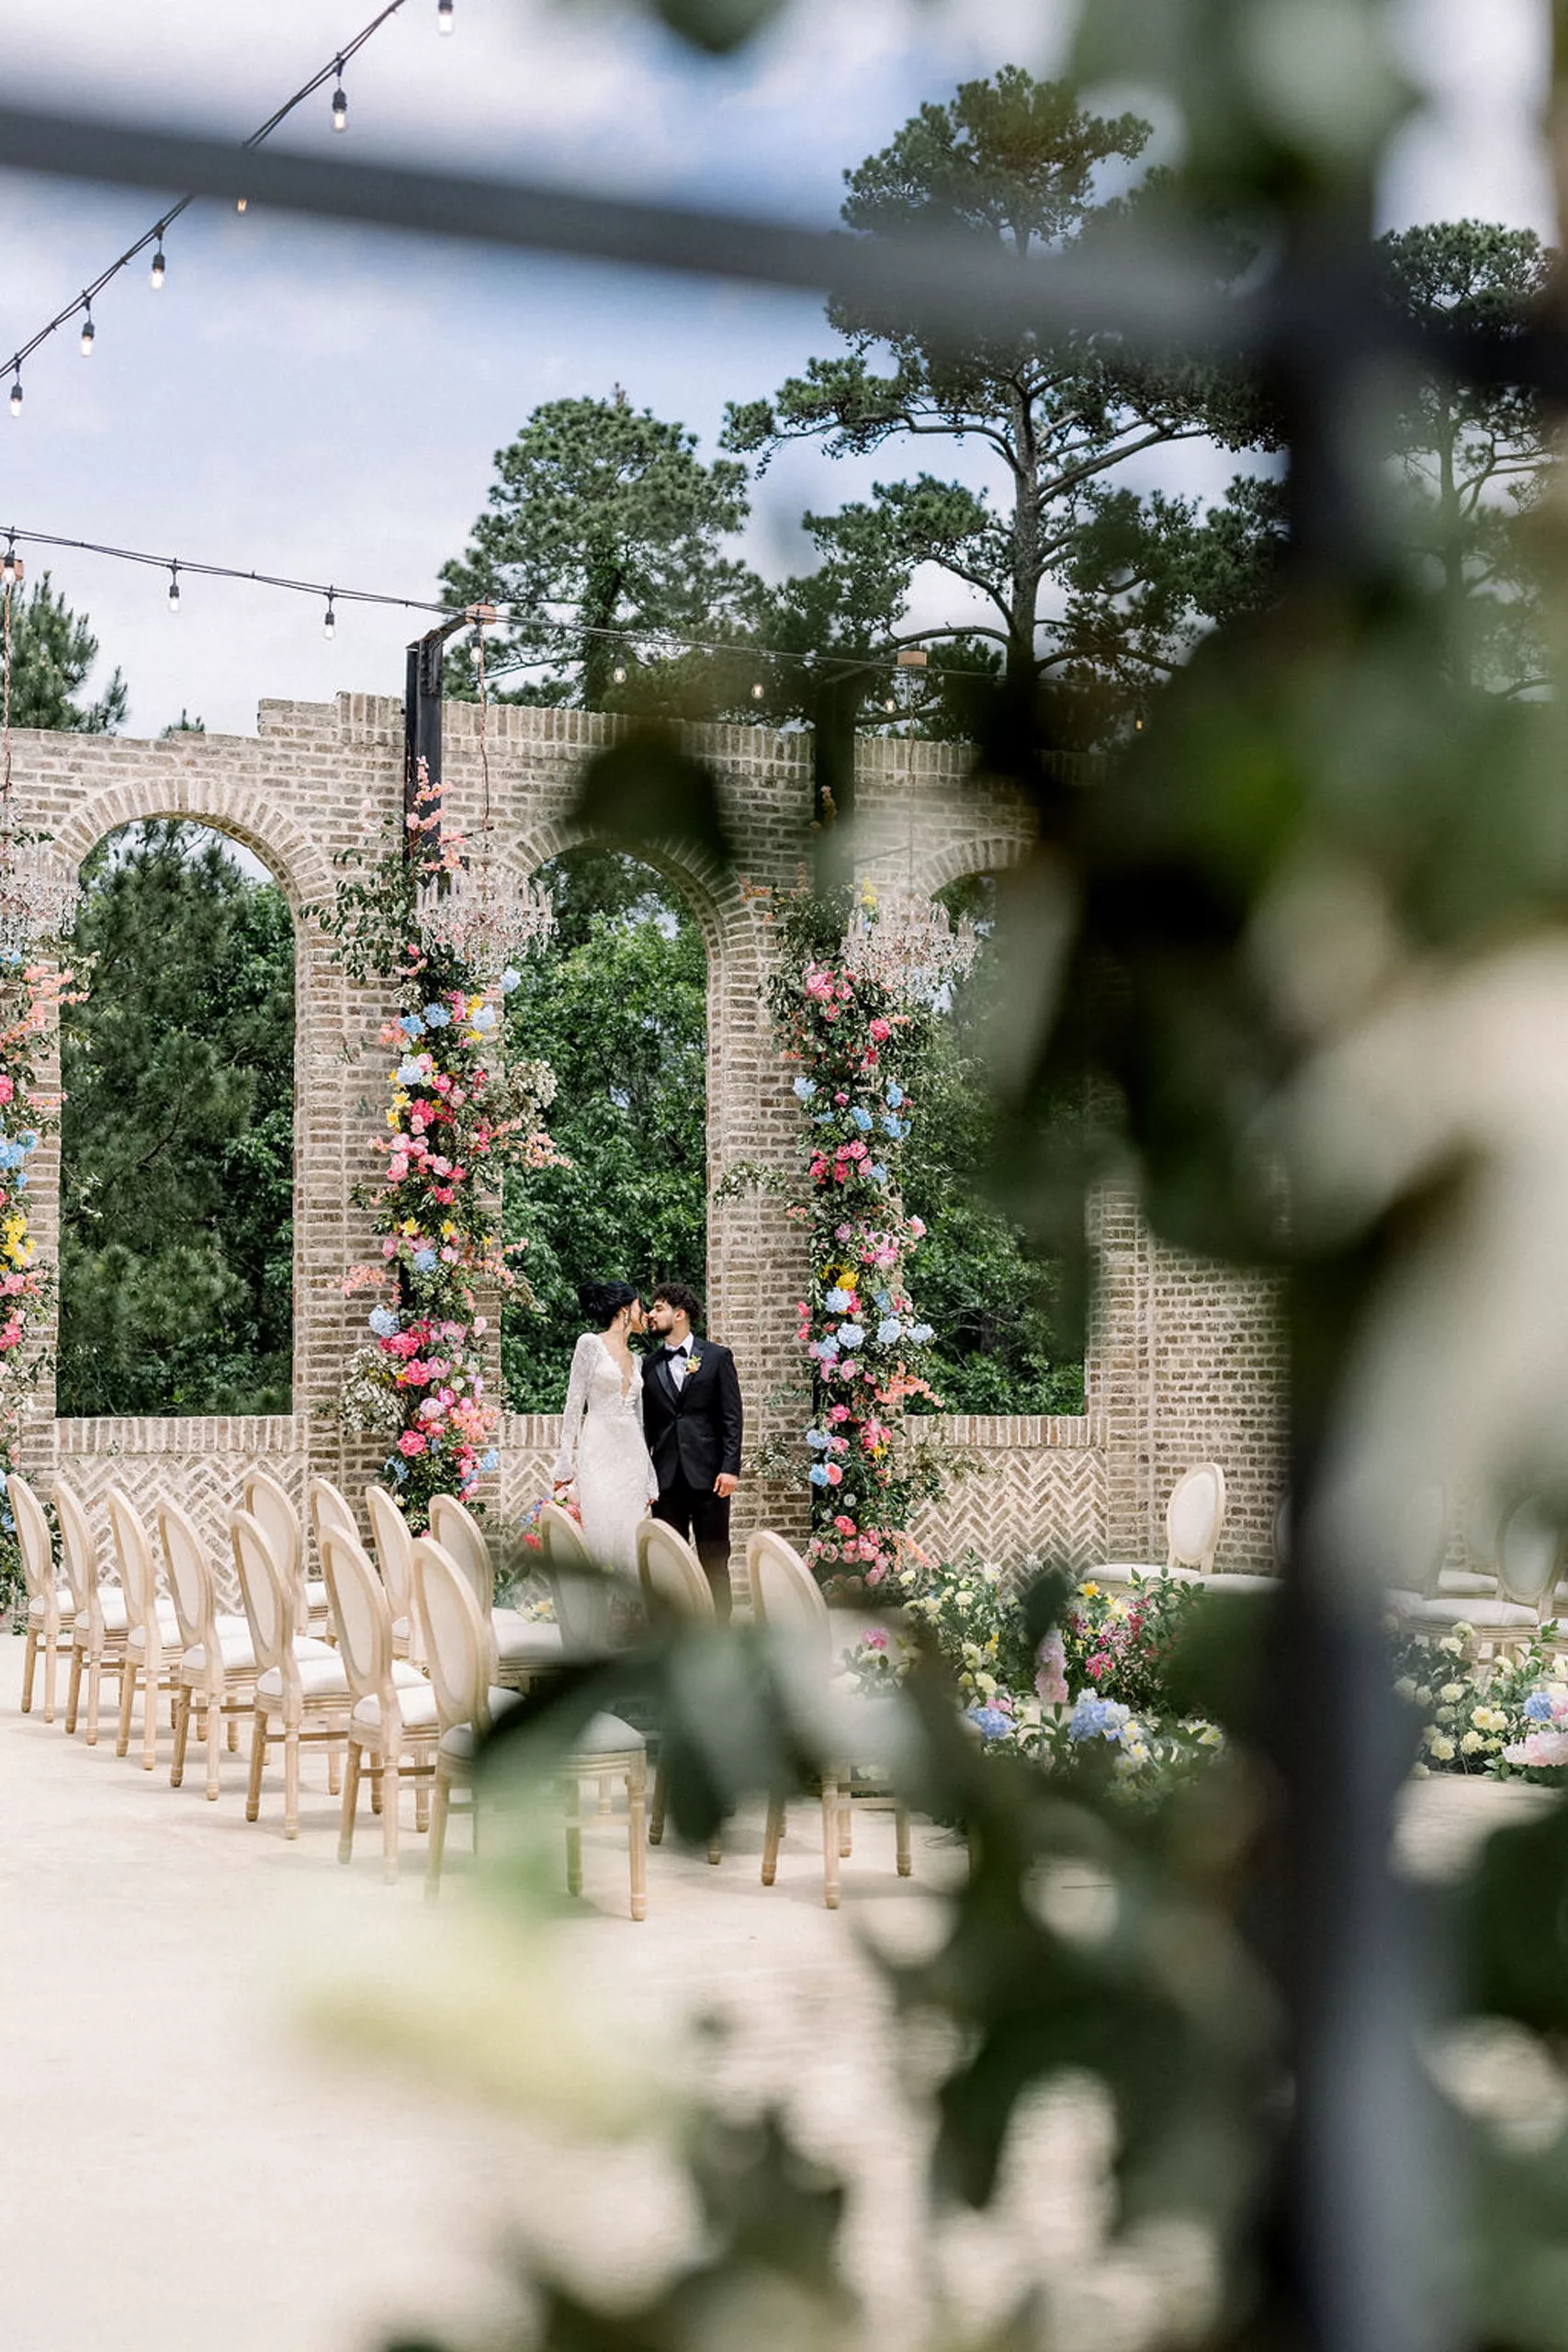 Newlyweds lean in for a kiss under a brick arch in the outdoor wedding ceremony location at iron manor wedding